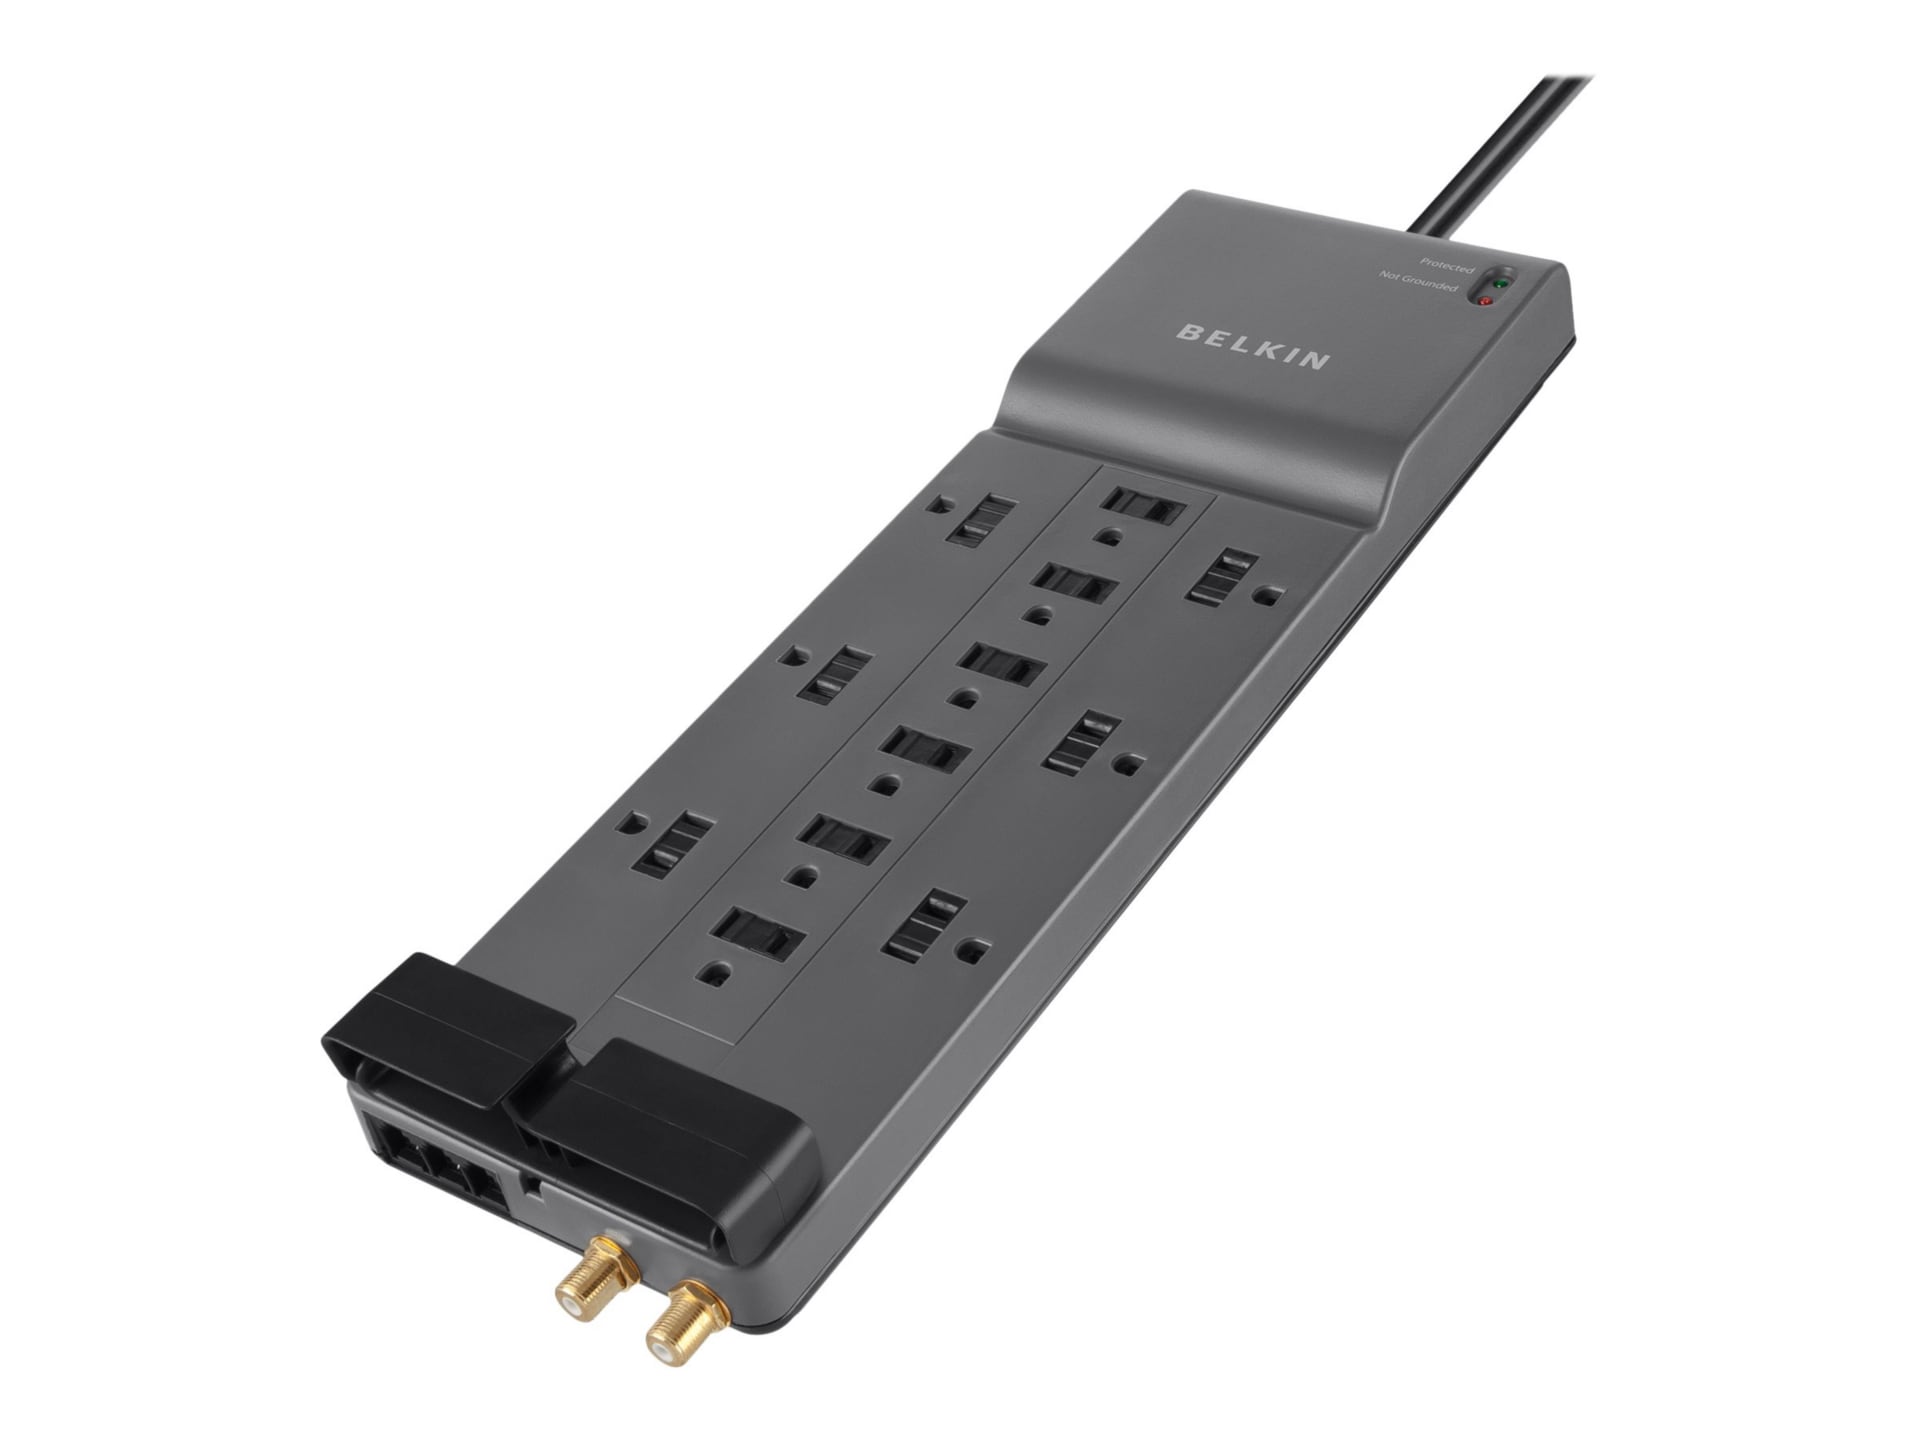 Belkin 12-Outlet Surge Protector with 8-foot cord - 12 AC Outlets, 3940 Joule - 2 RJ11 Ports